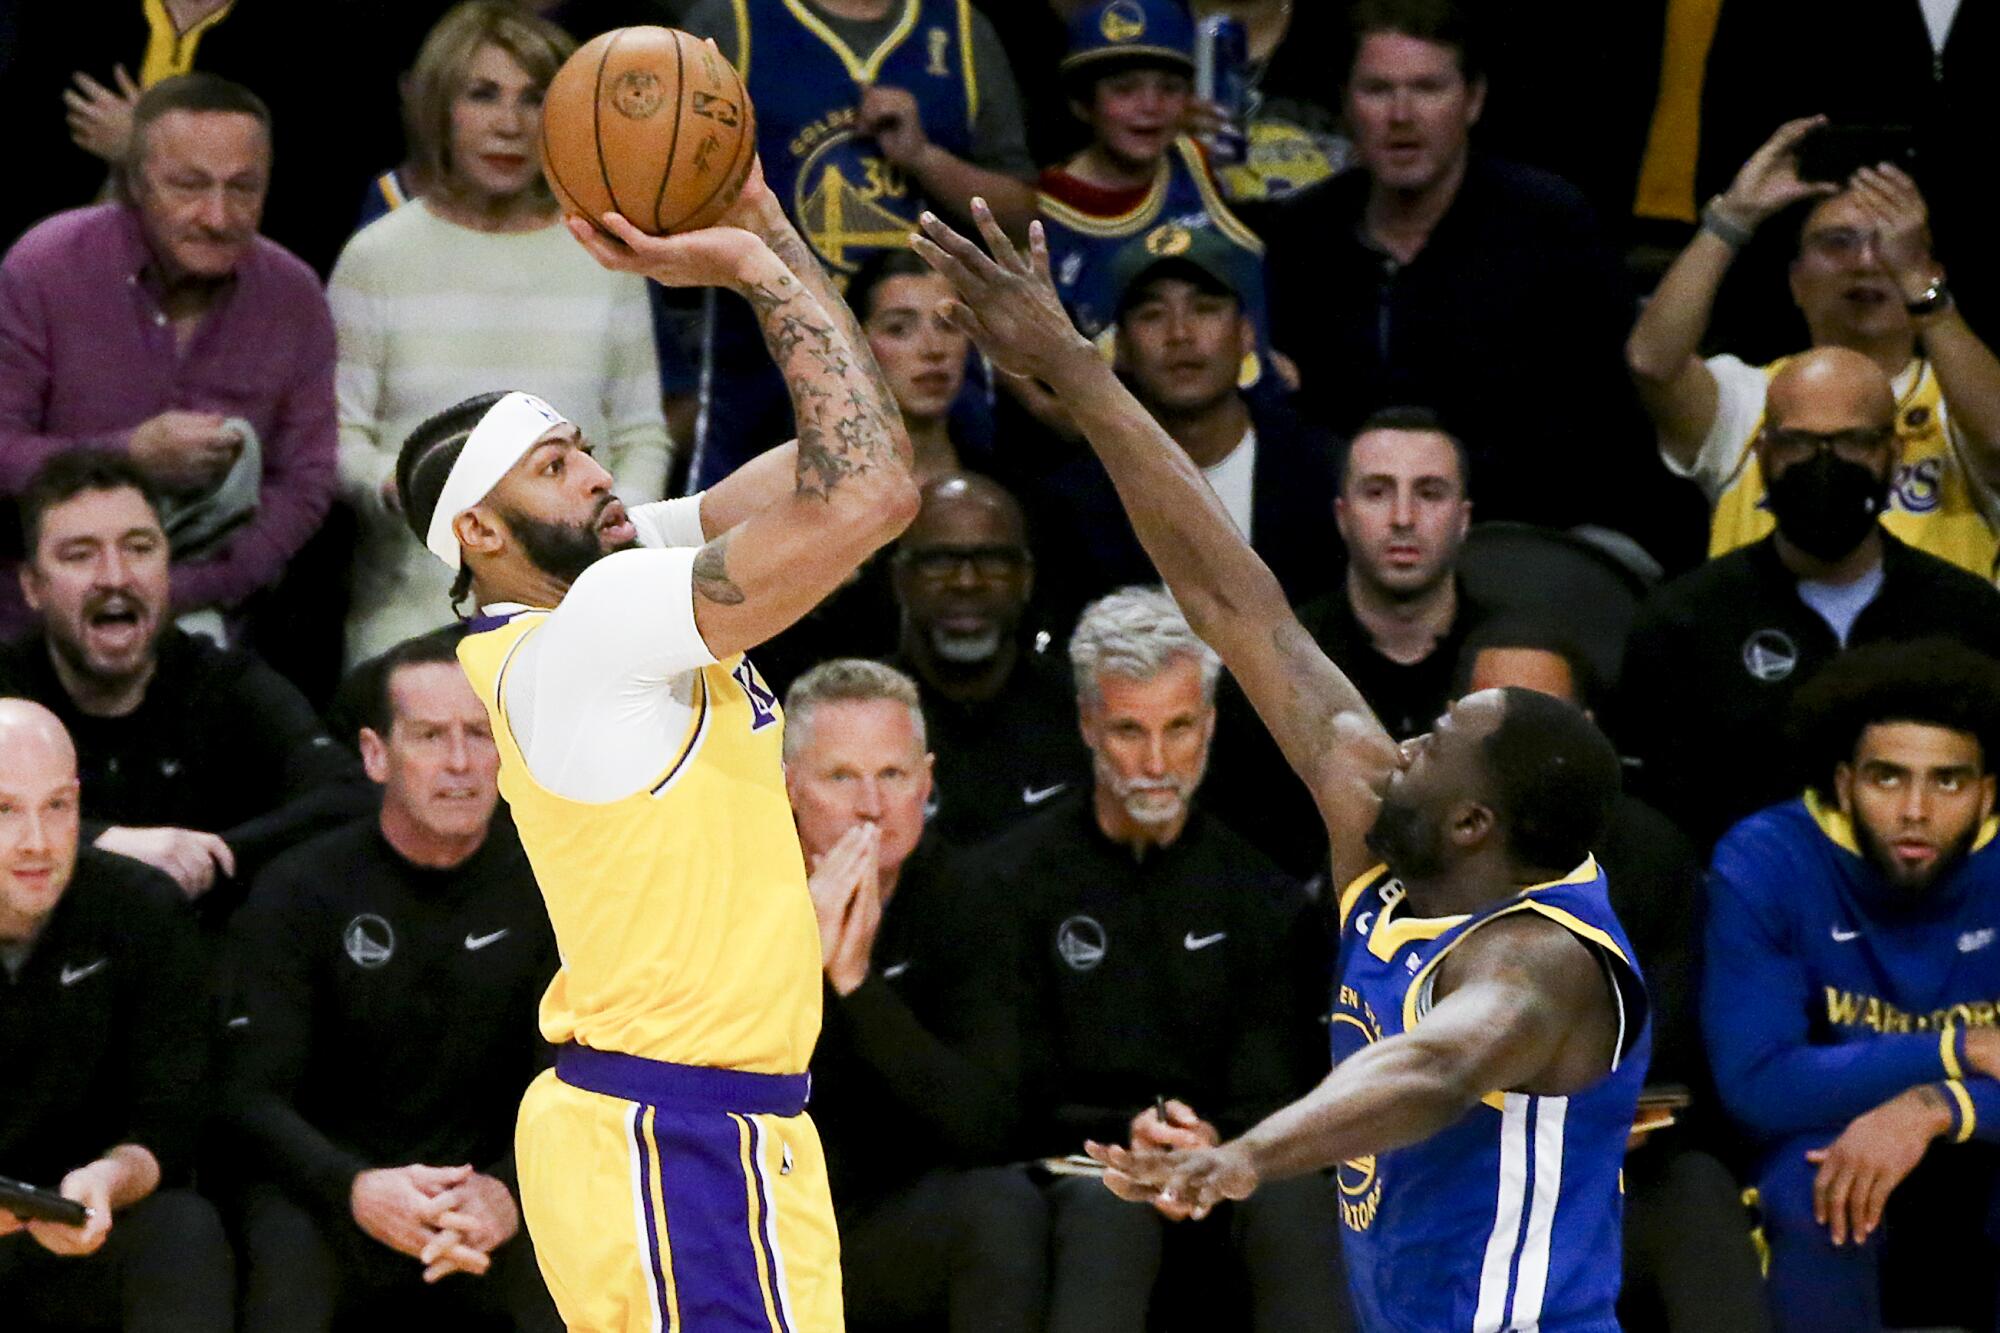 Lakers forward Anthony Davis, left, shoots over an outstretched arm of Warriors forward Draymond Green.